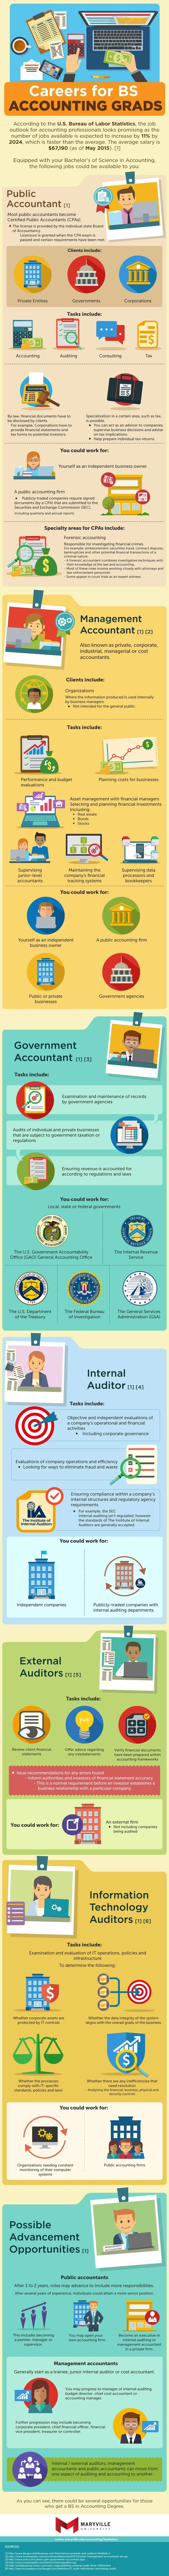 Careers for BS in Accounting Grads #infographic